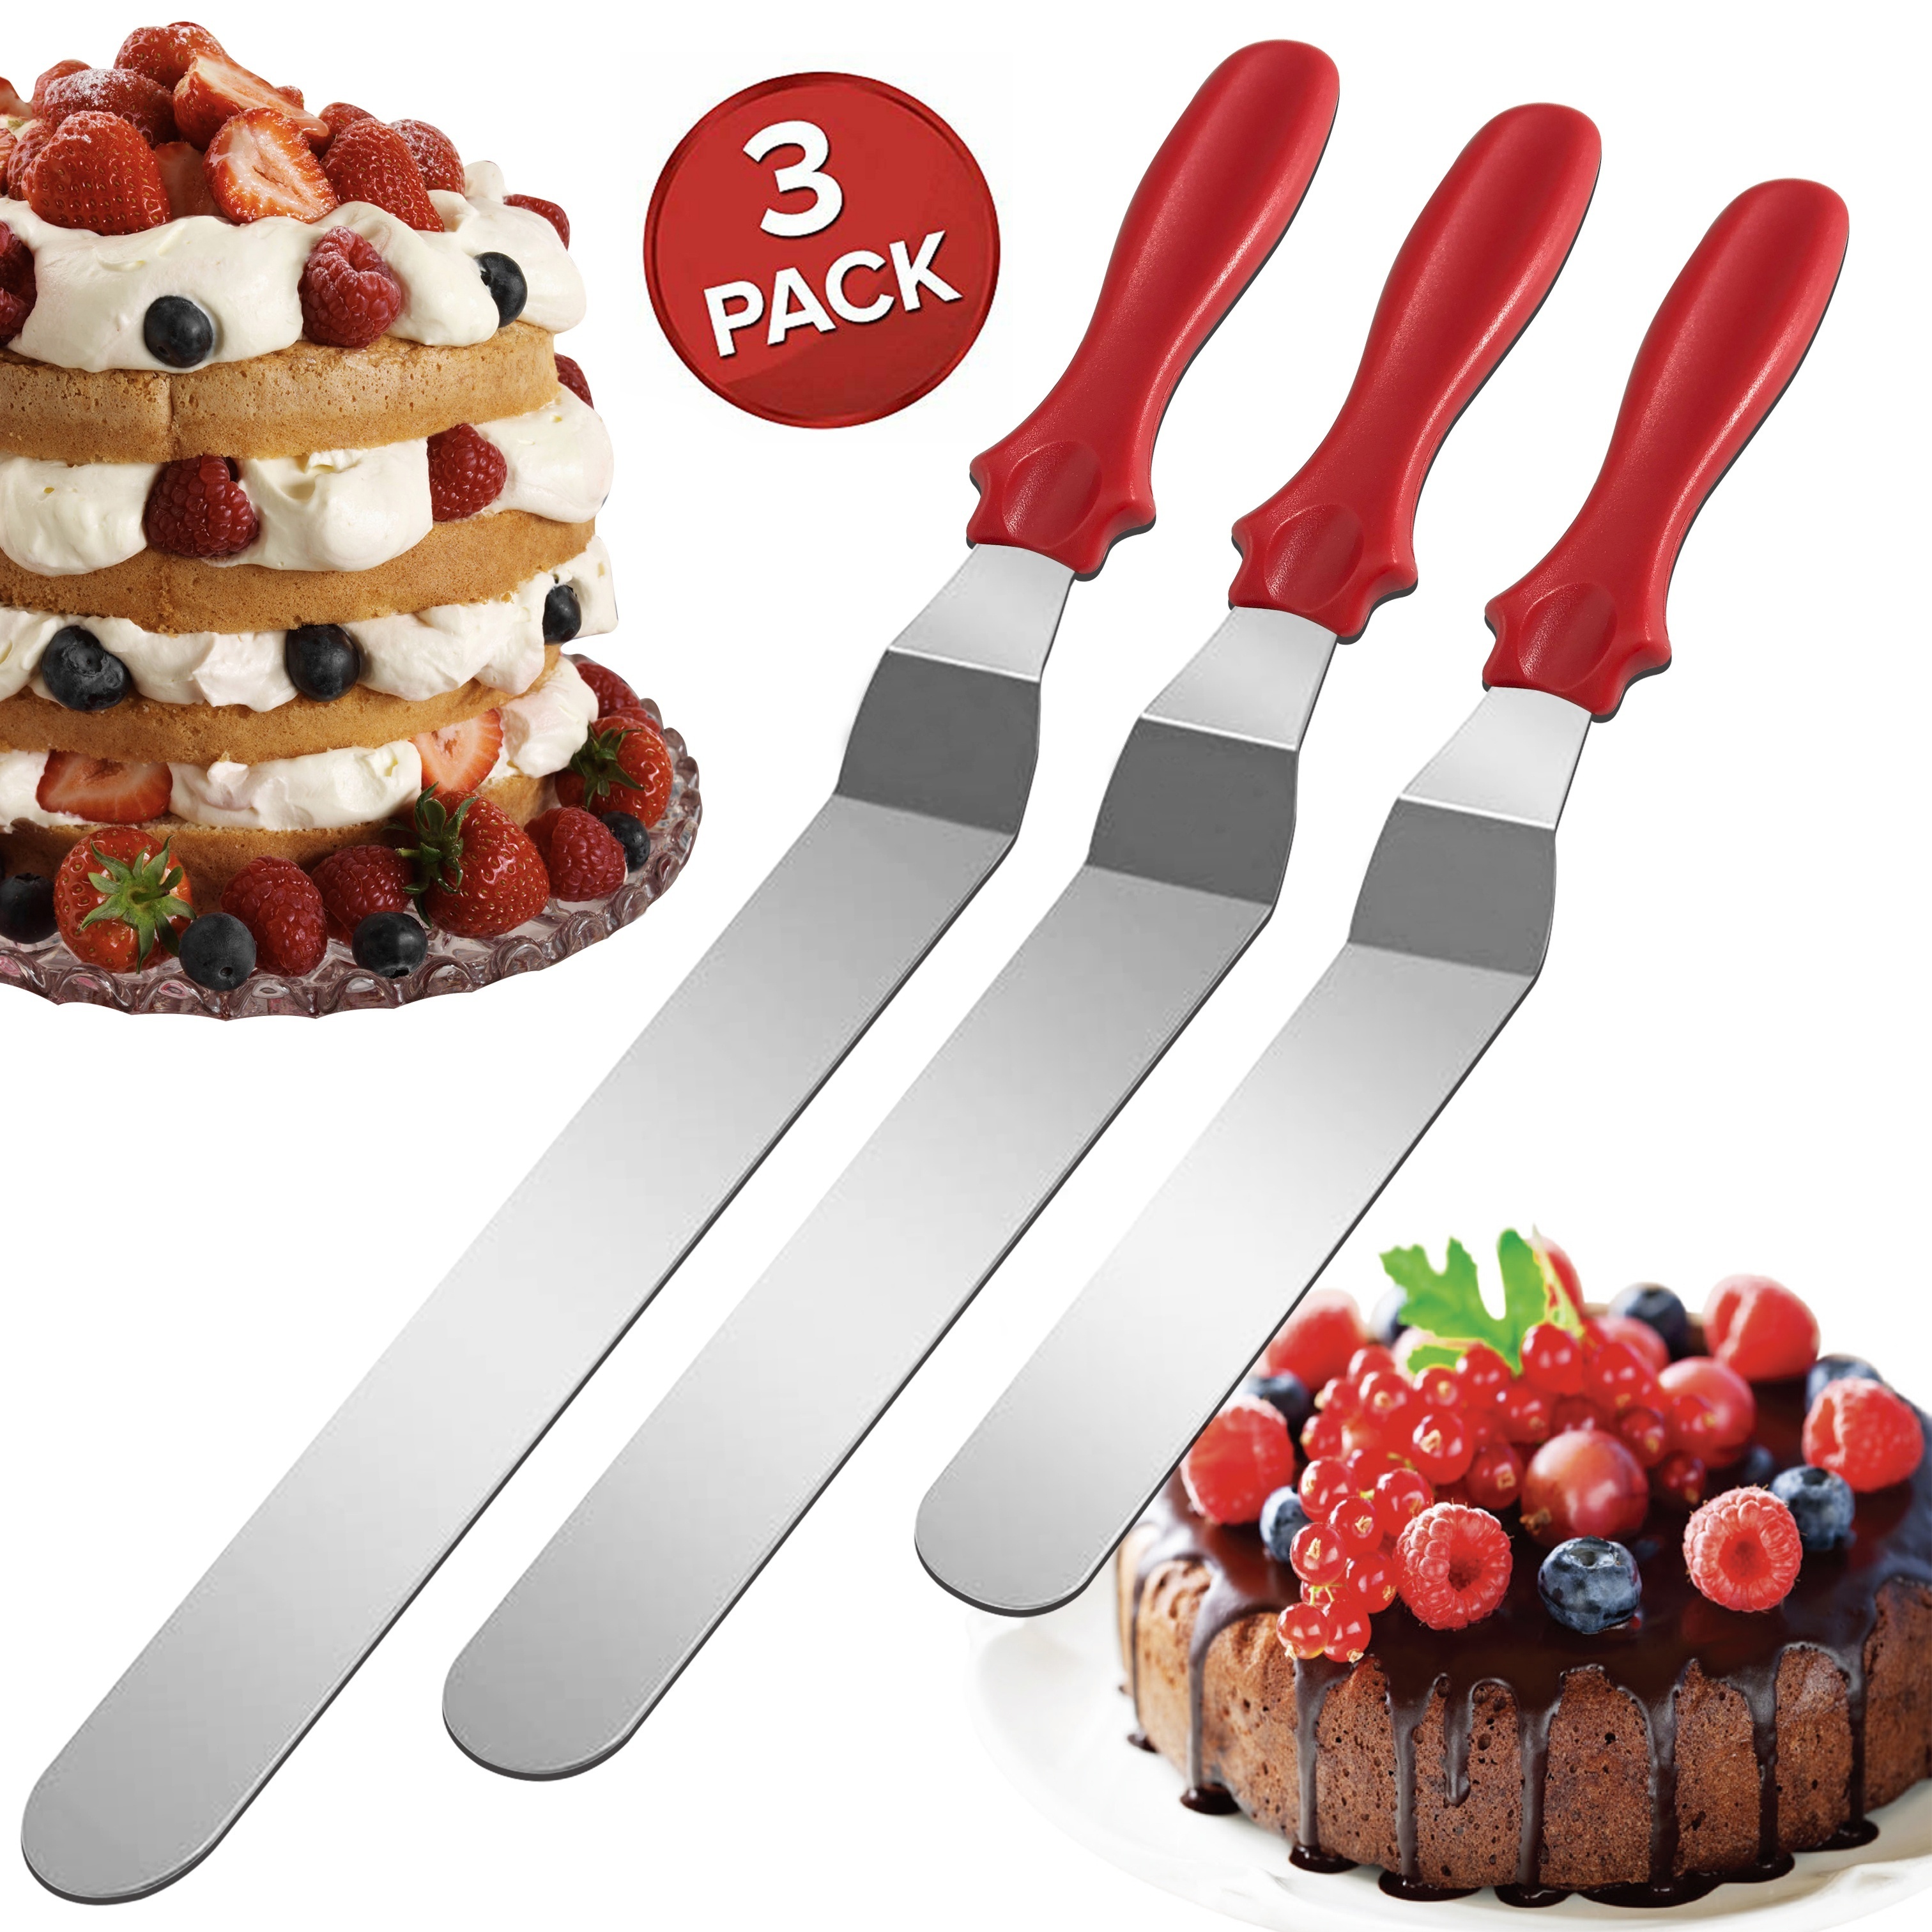 Pampered Chef Large Long Handled Spatula Spreader Stainless Steel, Cake  Decorating, Frosting Spreader 